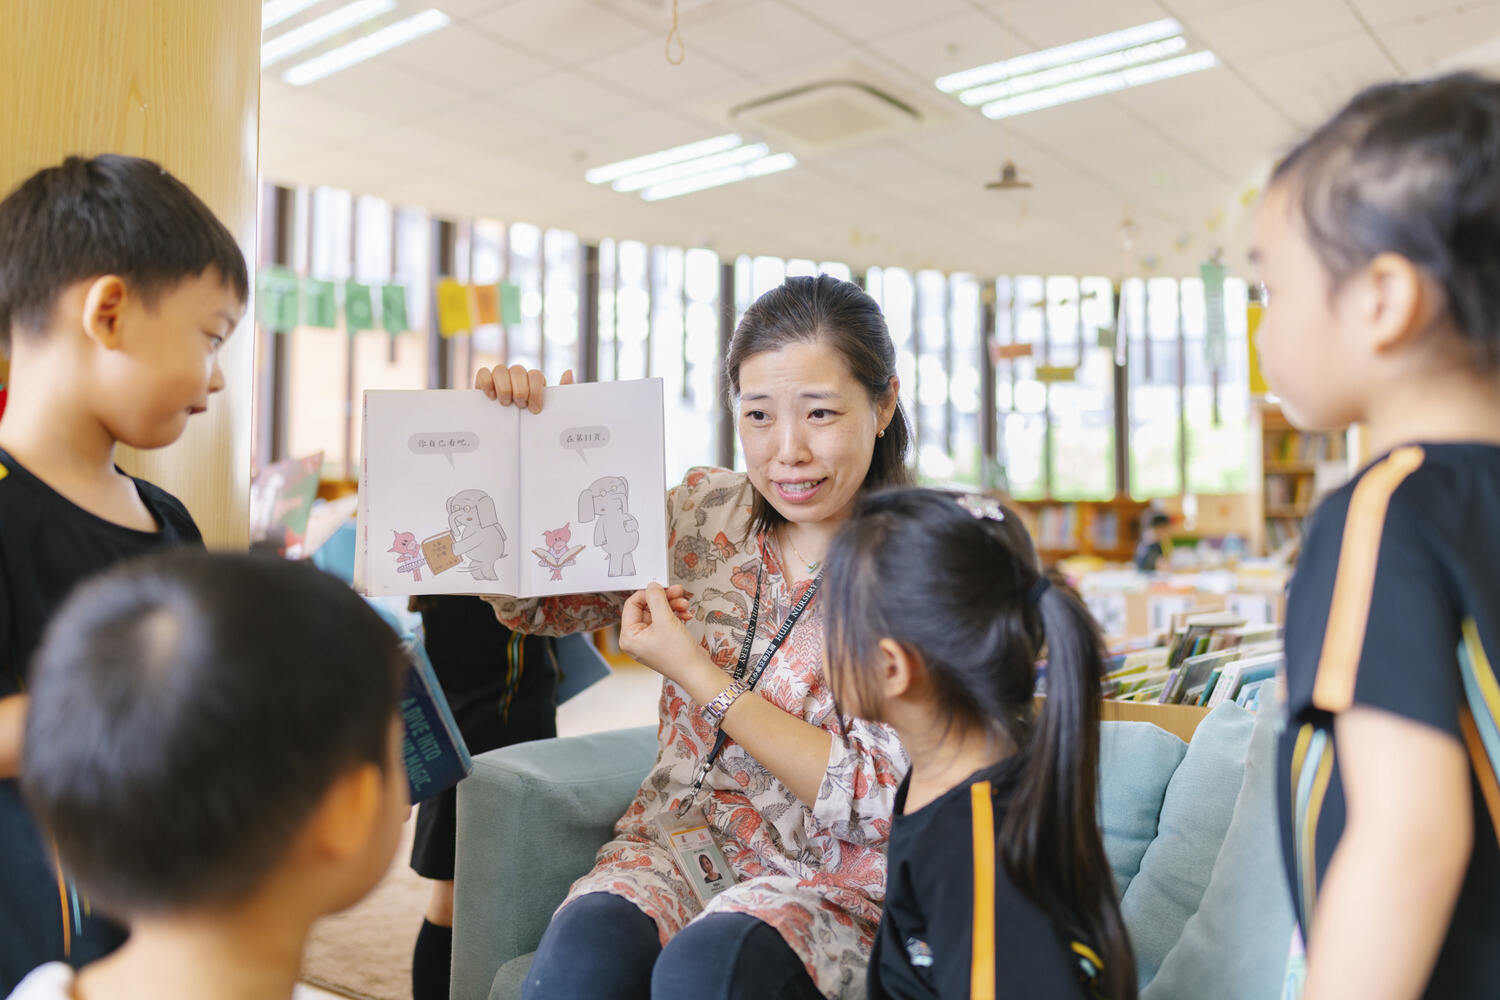 At Huili Nursery, language learning opportunities are everywhere